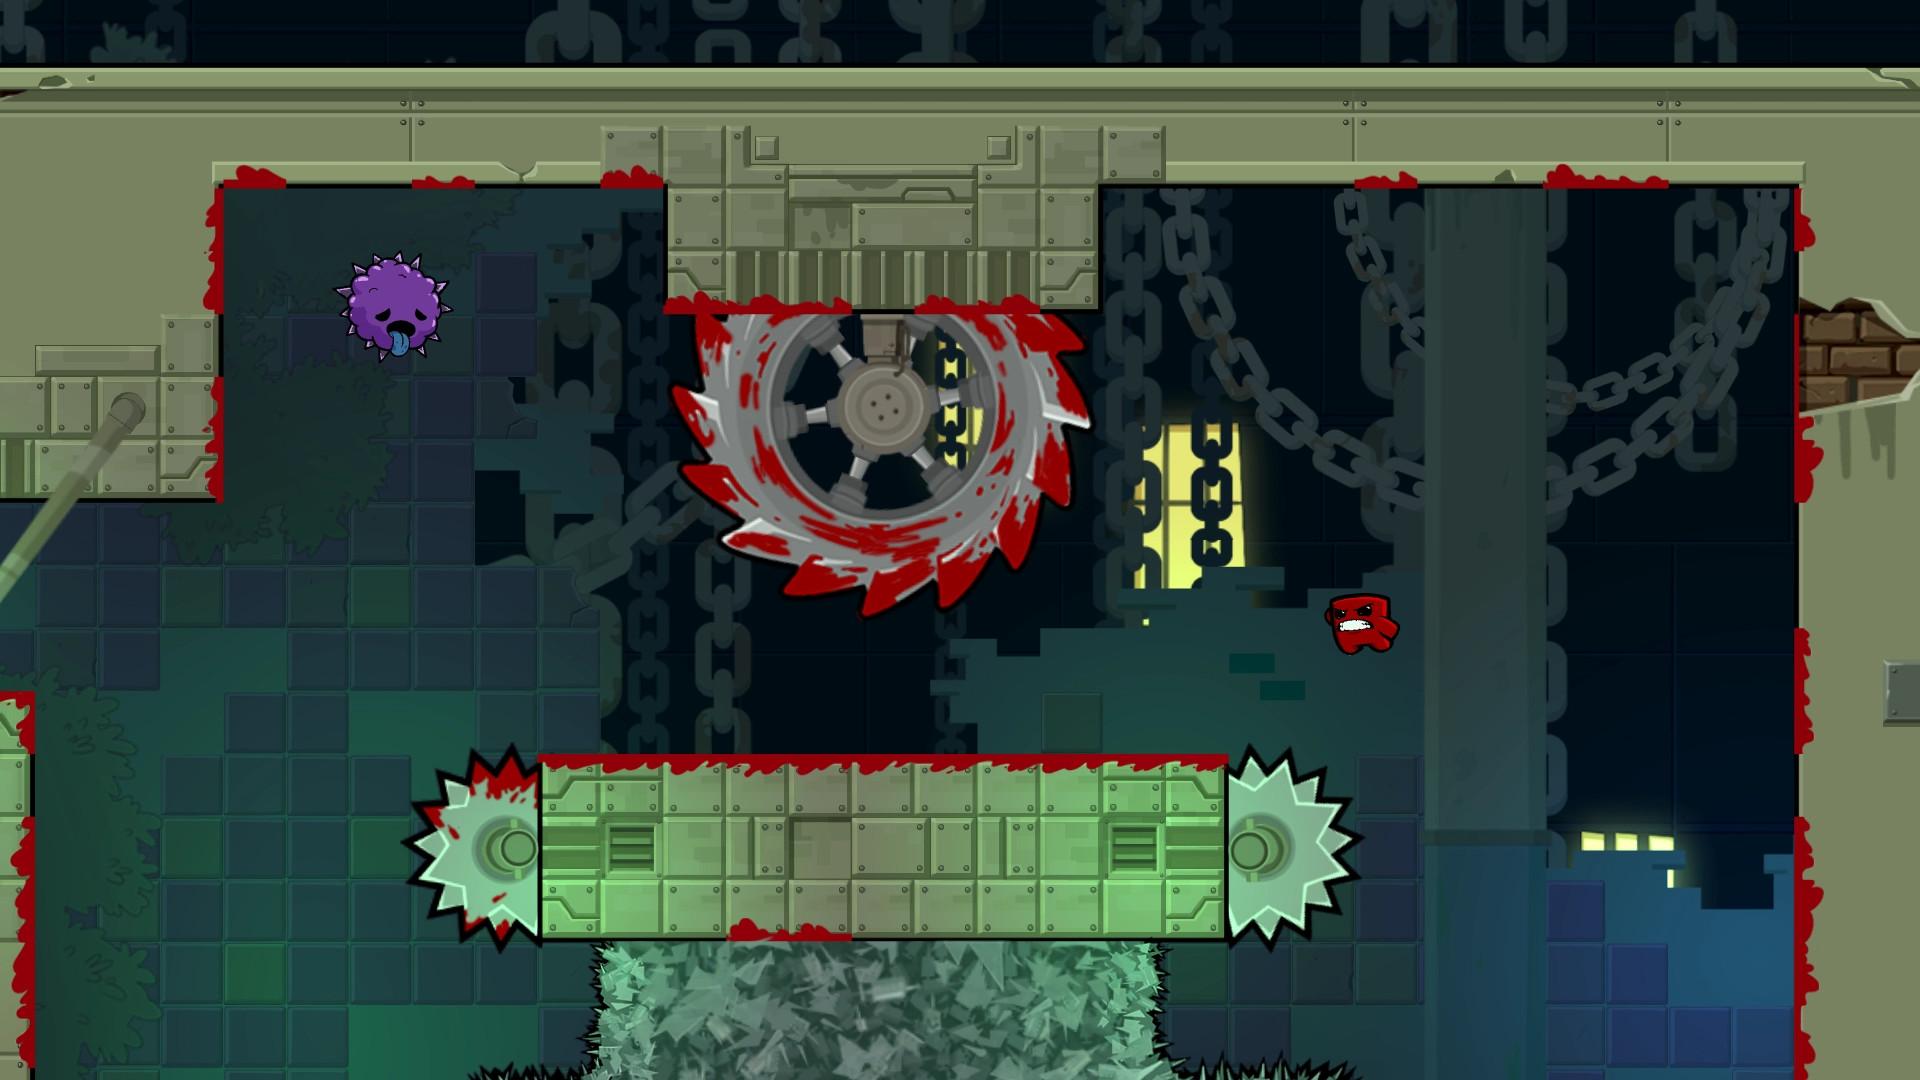 Super Meat Boy Forever debuts on Epic Games Store in April. Rock